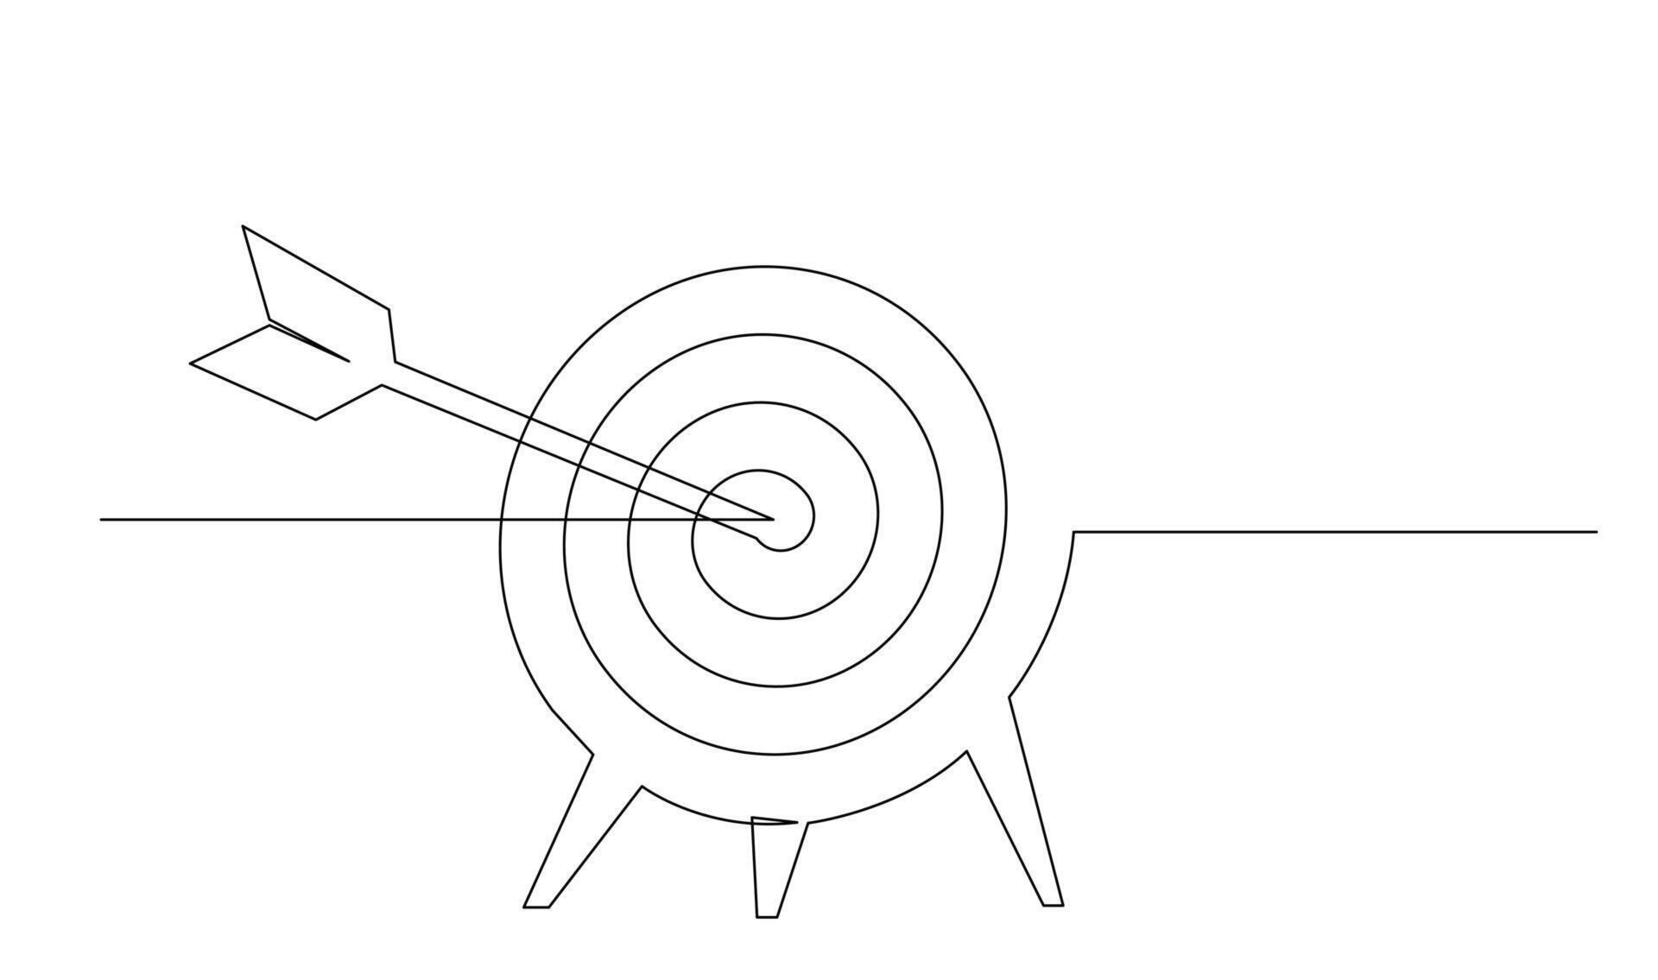 Continuous line drawing of arrow in center of target design vector